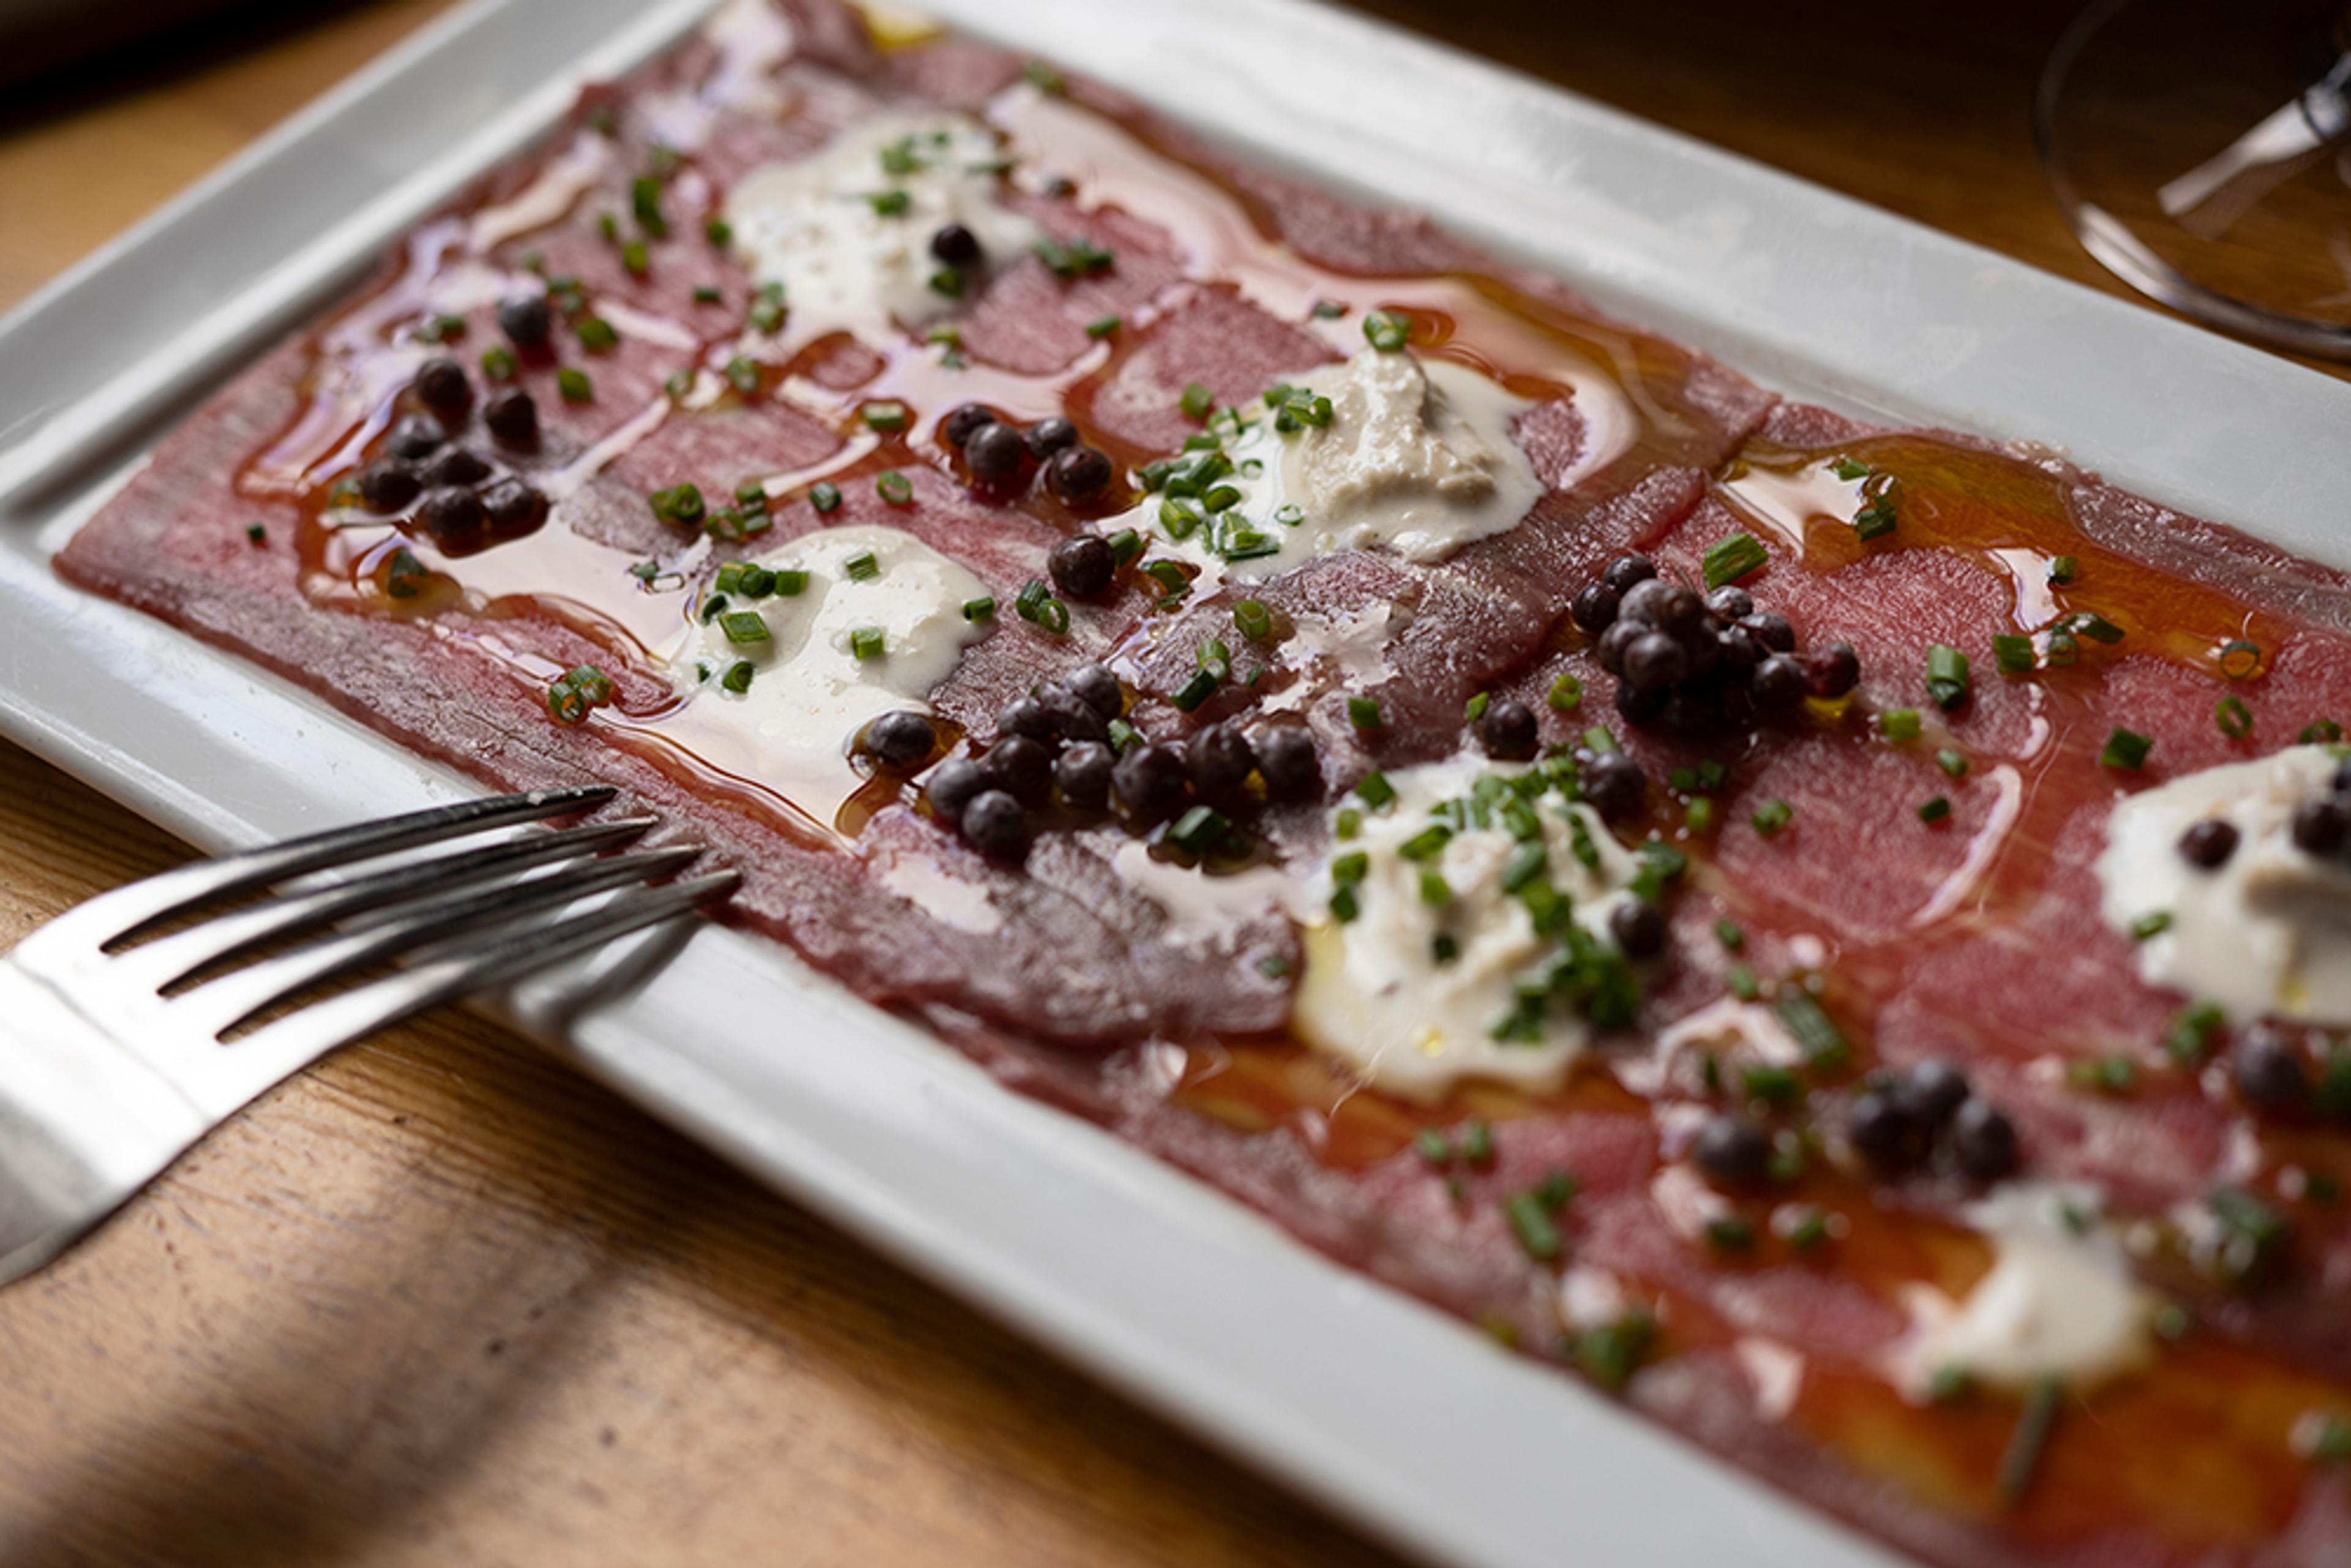 Beef carpaccio with capers, olive oil